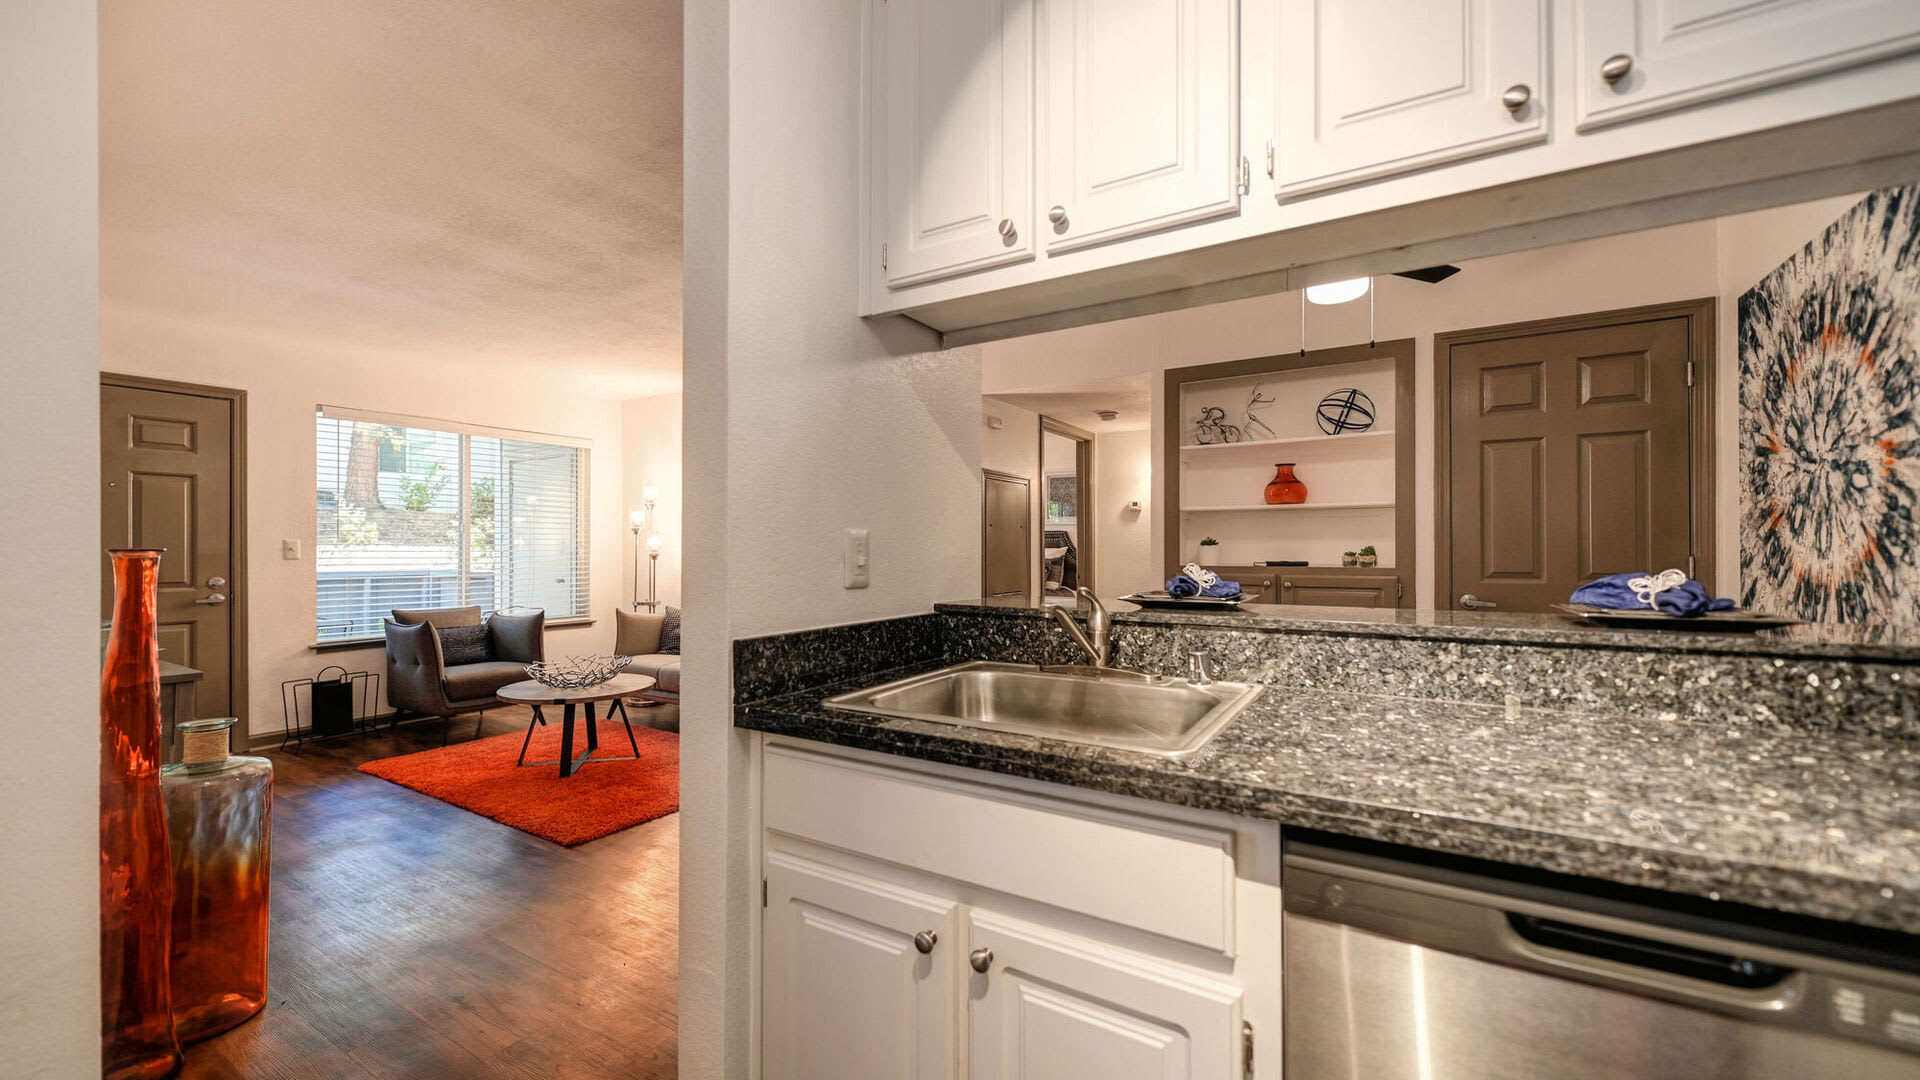 Kitchen and living room at Lake Pointe Apartments in Folsom, California